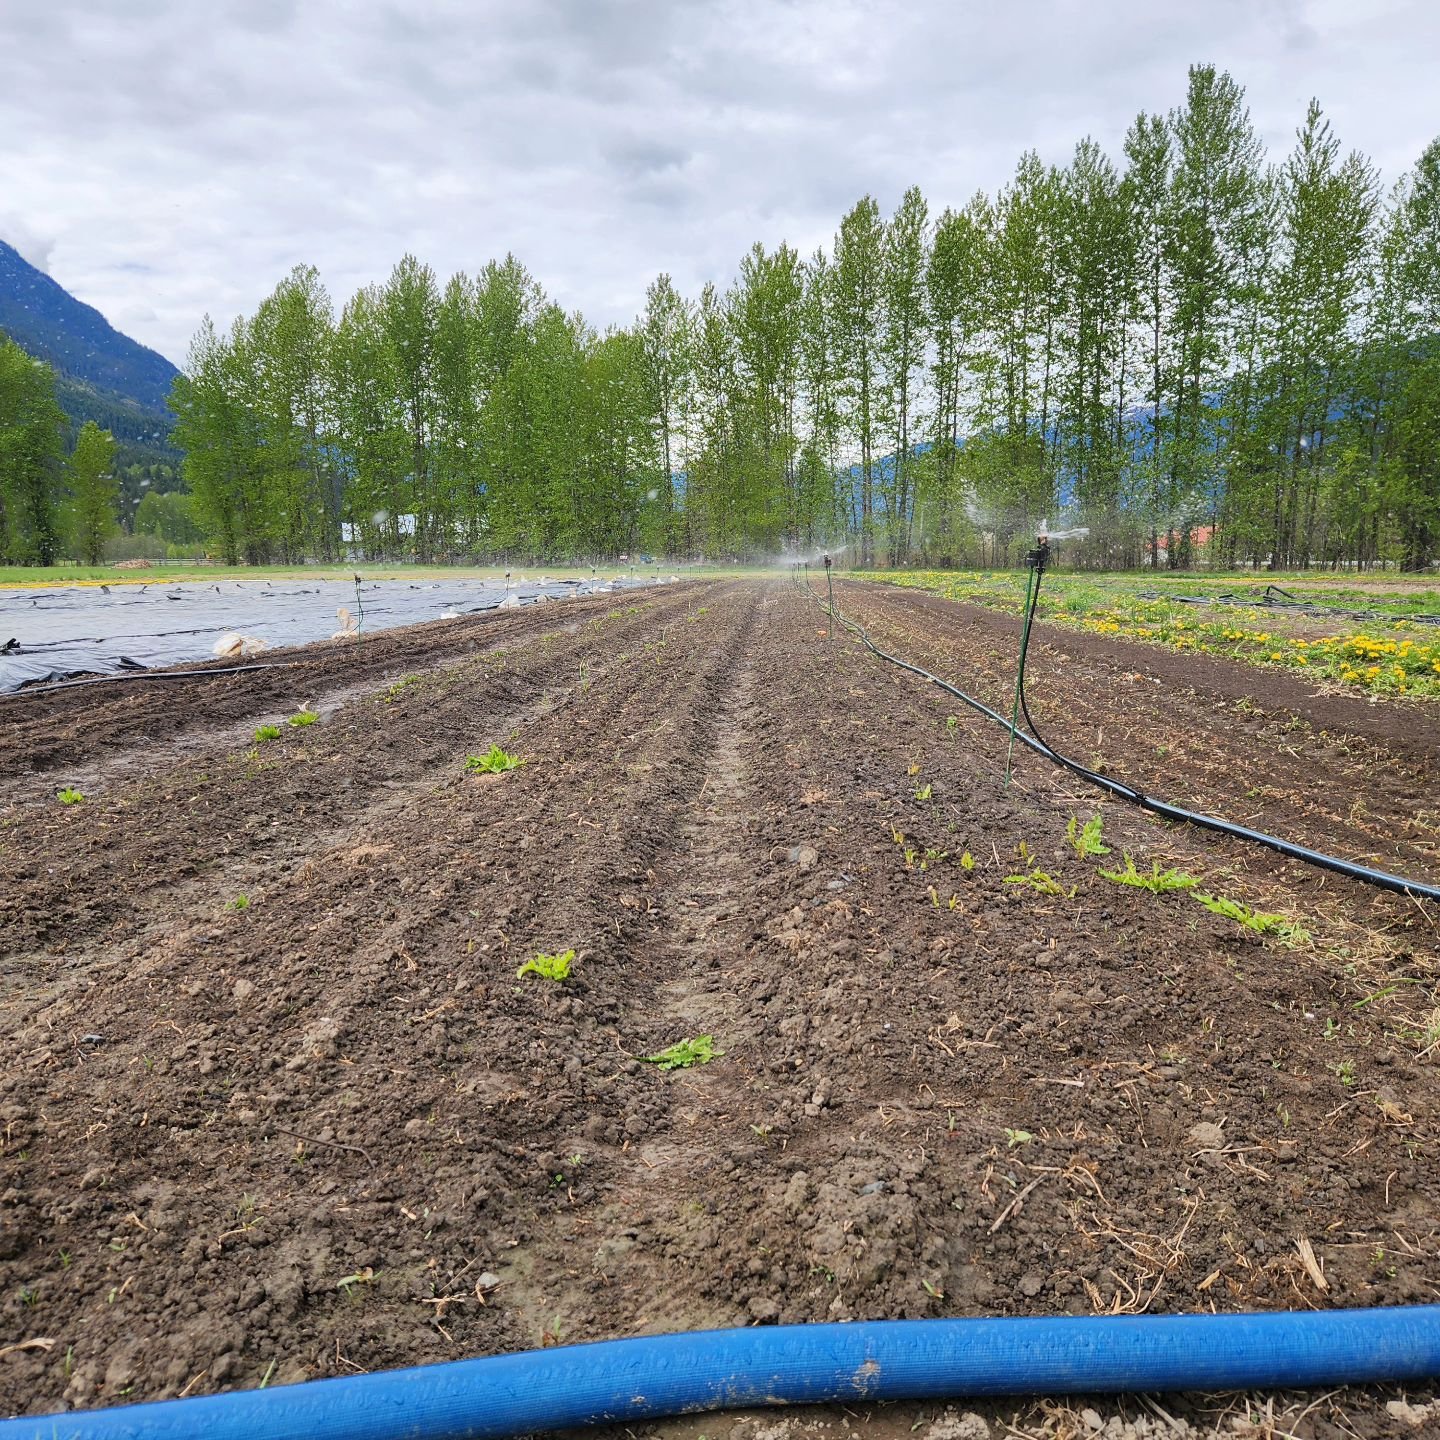 This might not be the most exciting picture on the surface, but look a little deeper, and it surely is. Let me explain:

Our irrigation system is up and running, and getting some much needed water to spring direct seeded and transplanted crops!

Last